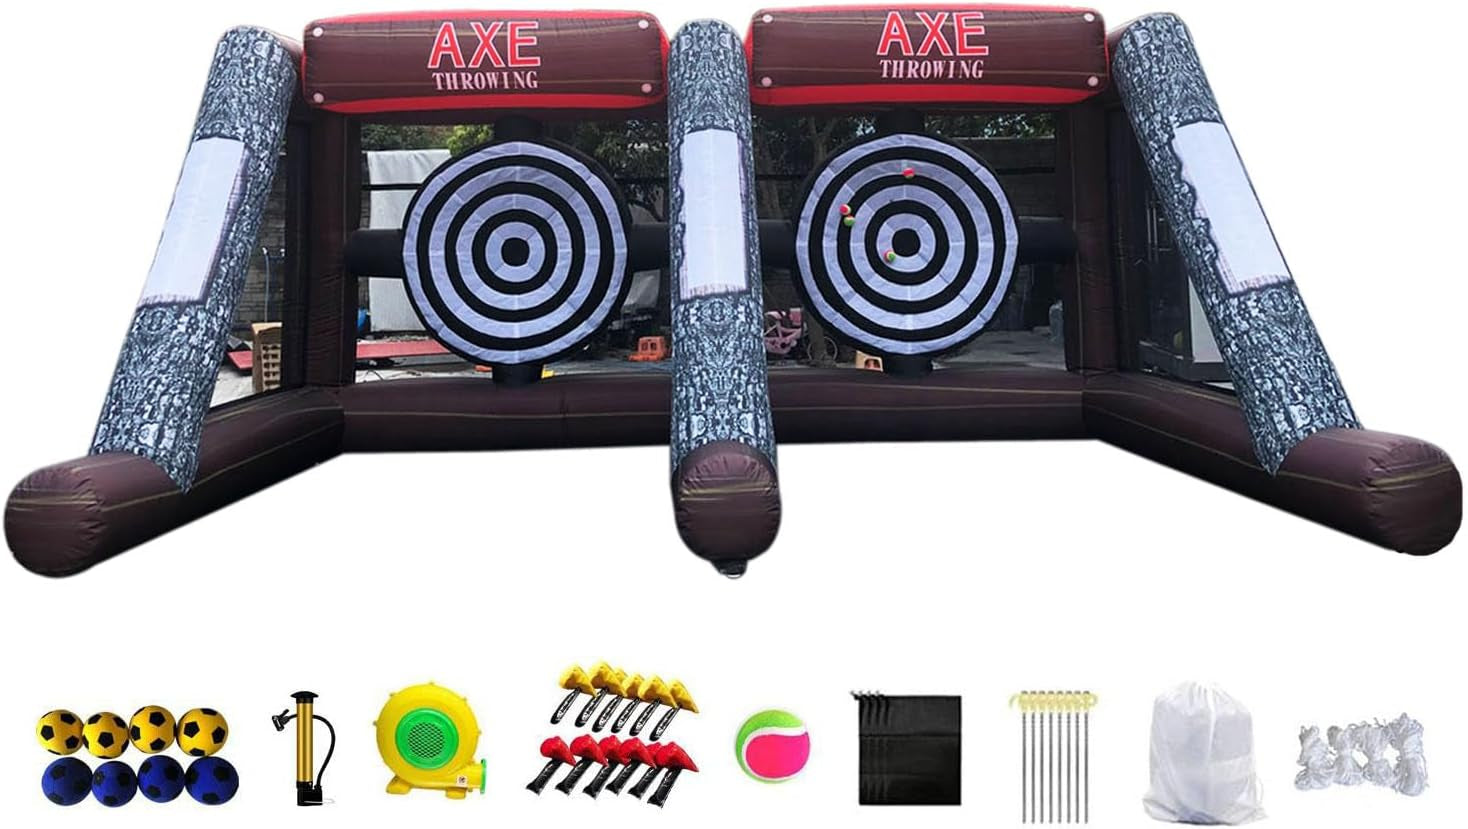 Inflatable Axe Throwing Game + Inflatable Ball Toss Target Dart Board for Backyard/Birthday/School/Team/Party Events